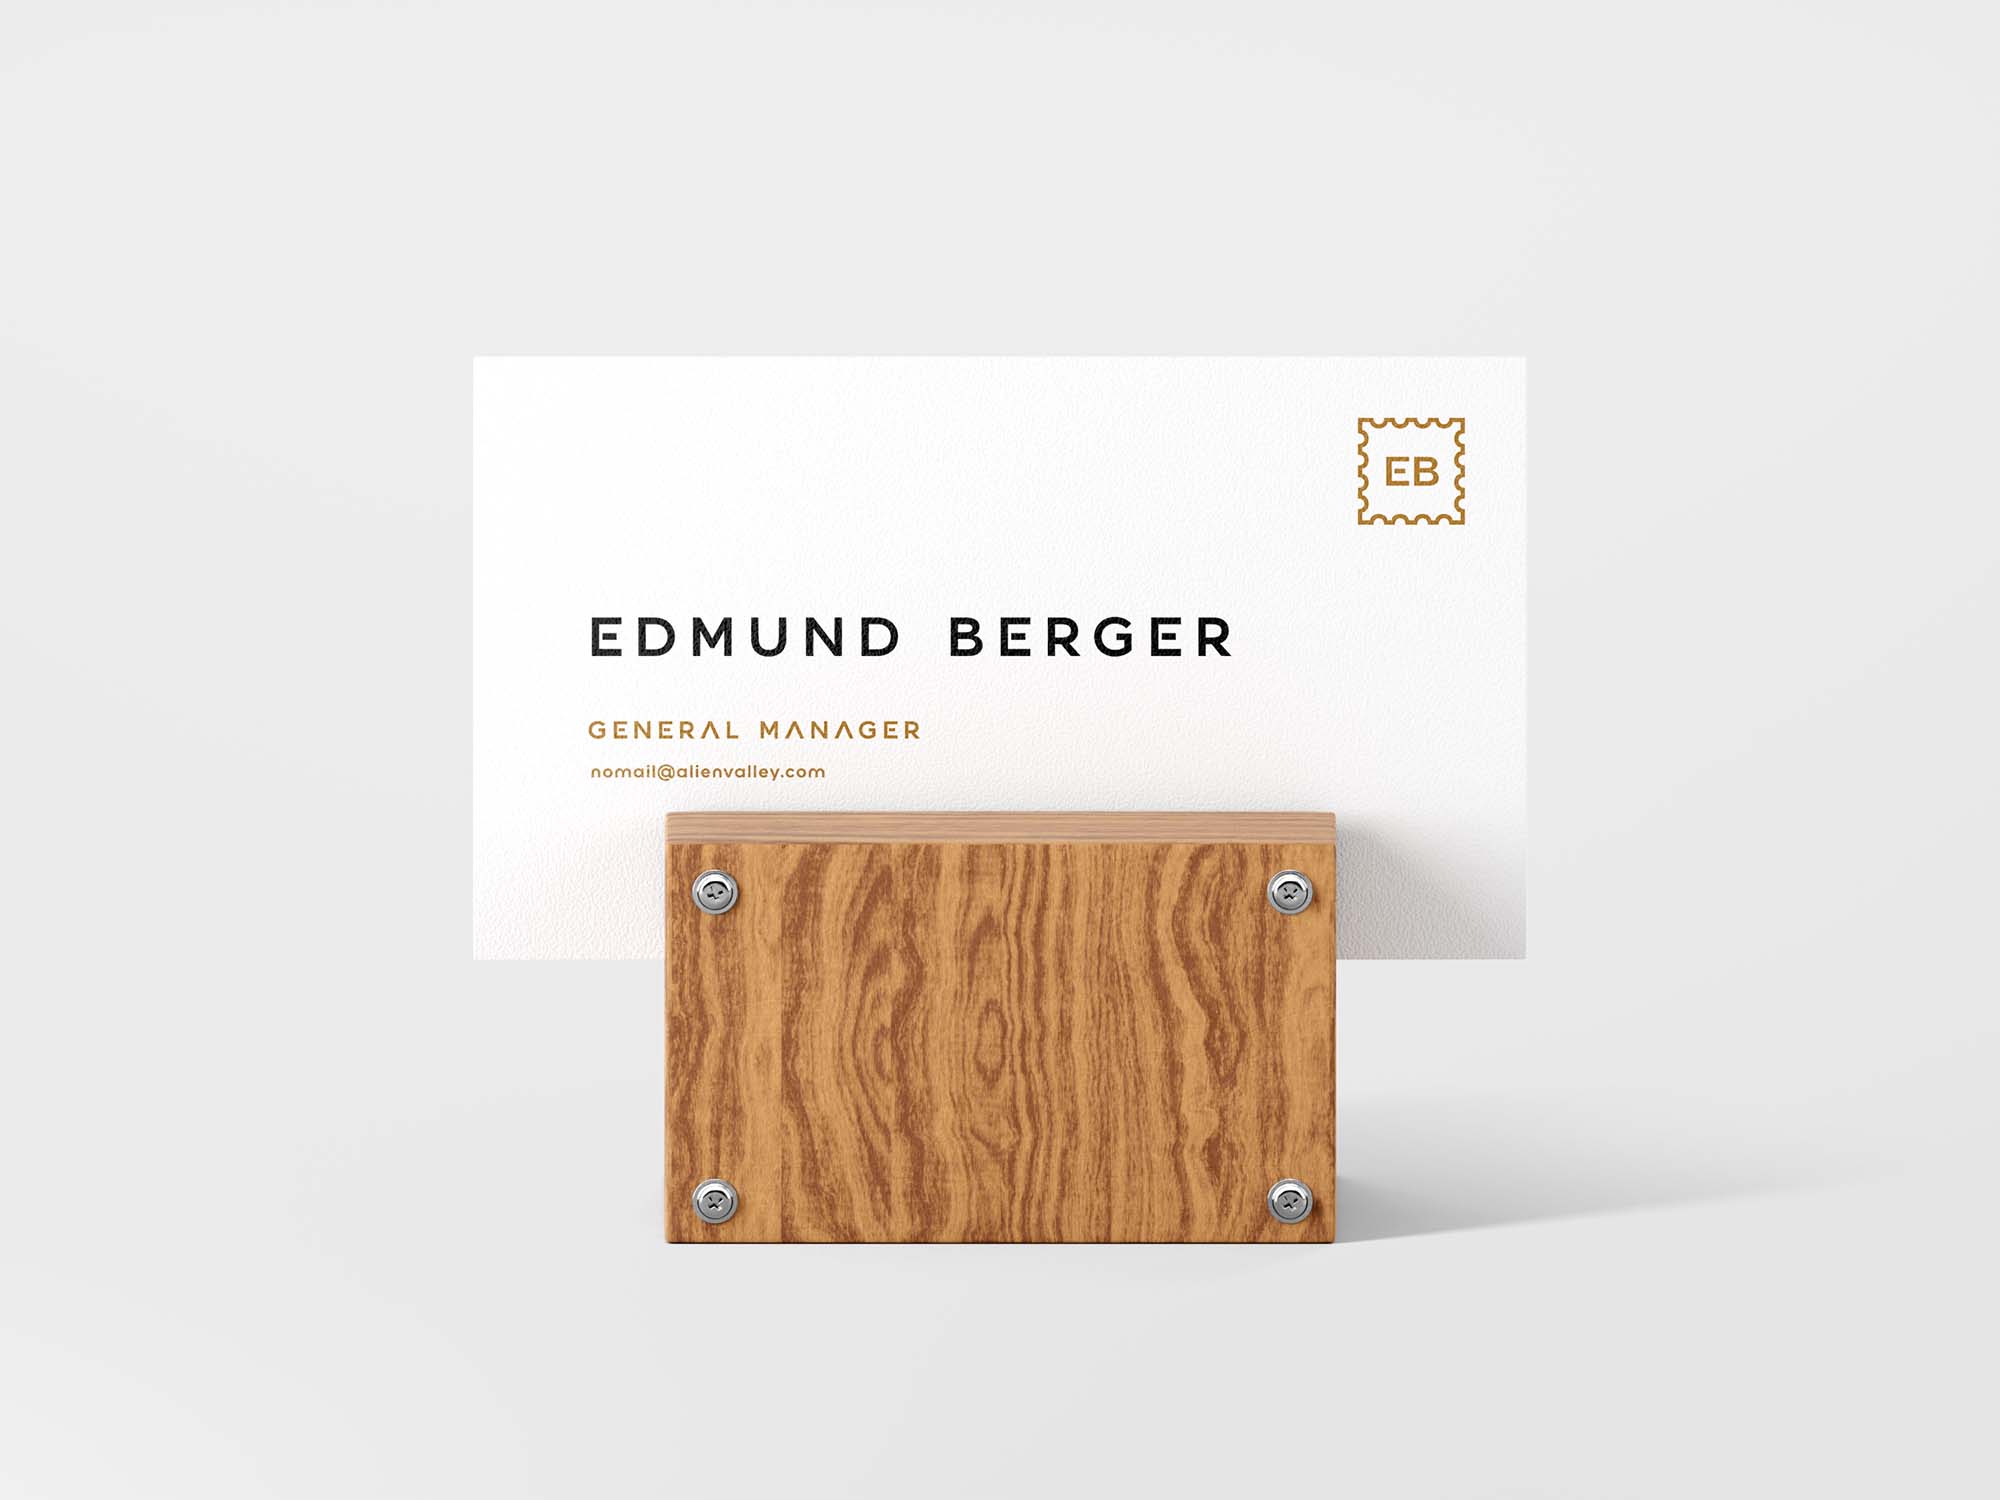 Elegant Business Card Mockup with Wooden Support in